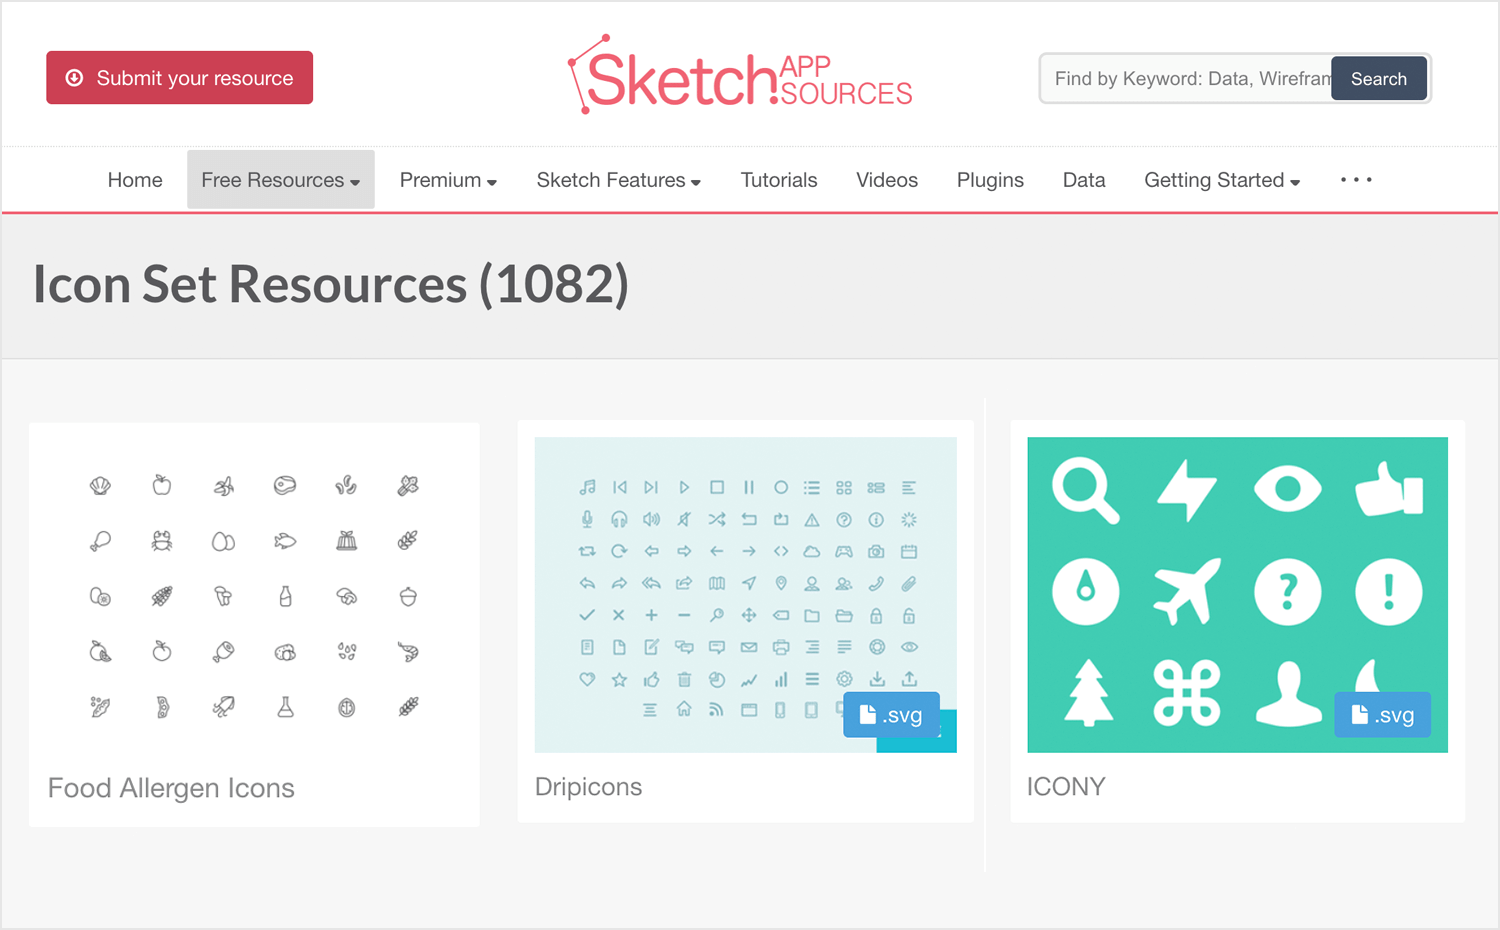 Free app icons to download - Sketch App Sources